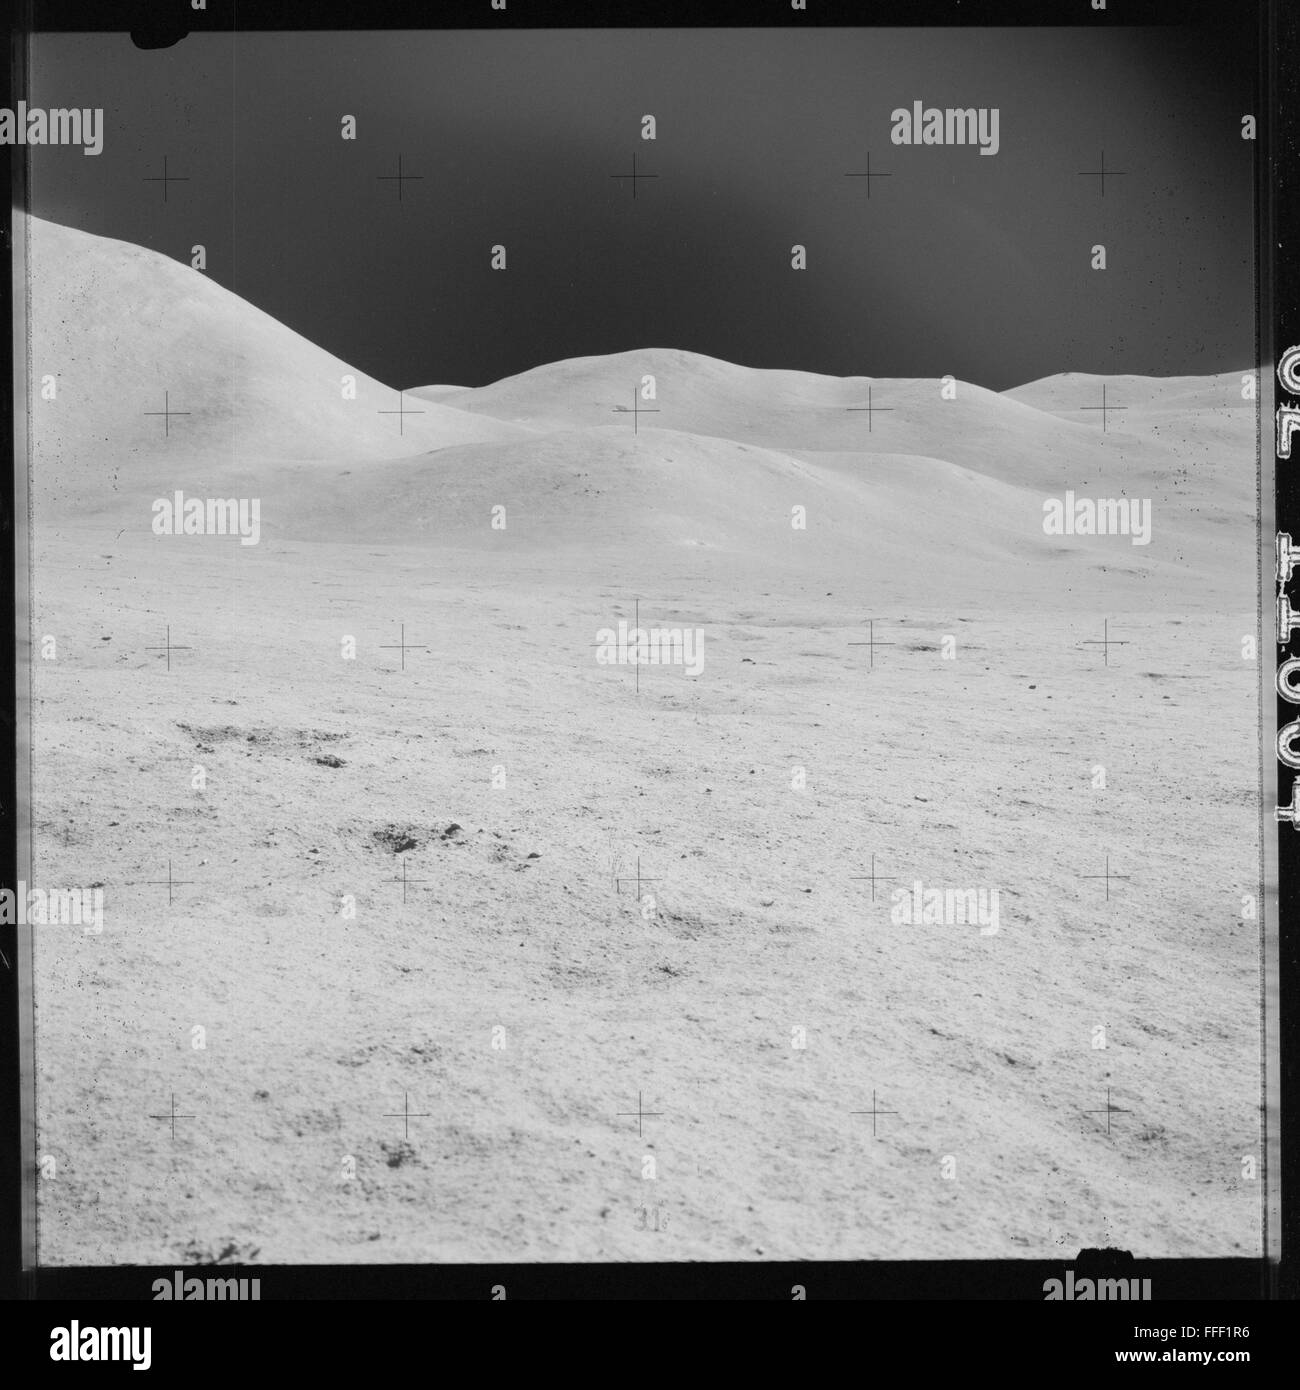 Apollo 15 untouched photographic archive, this is the complete unedited collection from the Apollo Mission Stock Photo